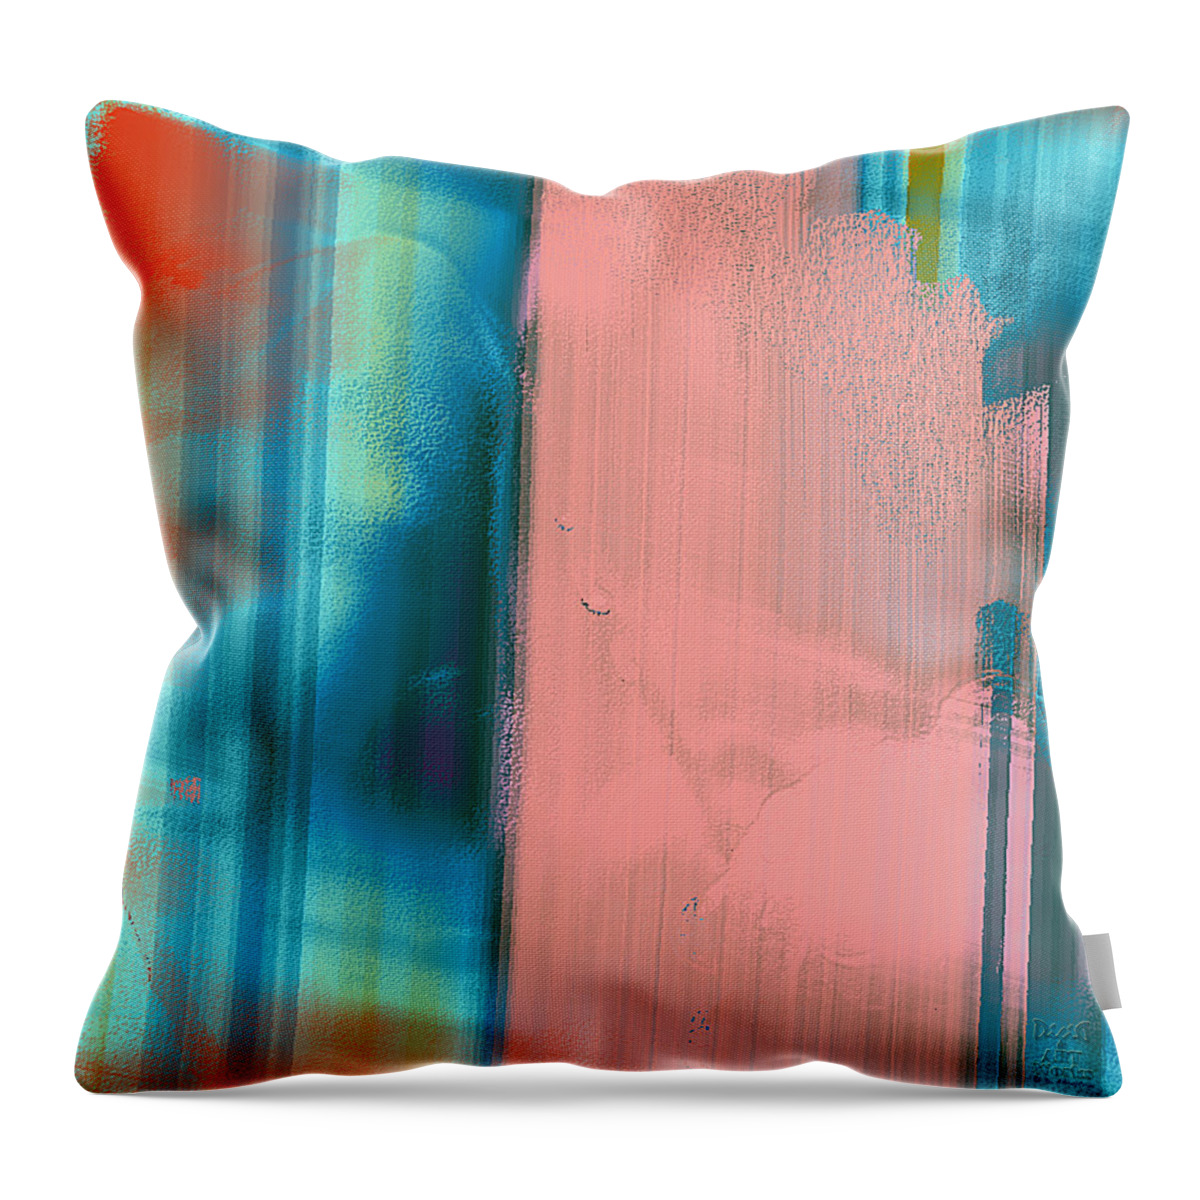 Ebsq Throw Pillow featuring the digital art Aqua Pink Abstract by Dee Flouton